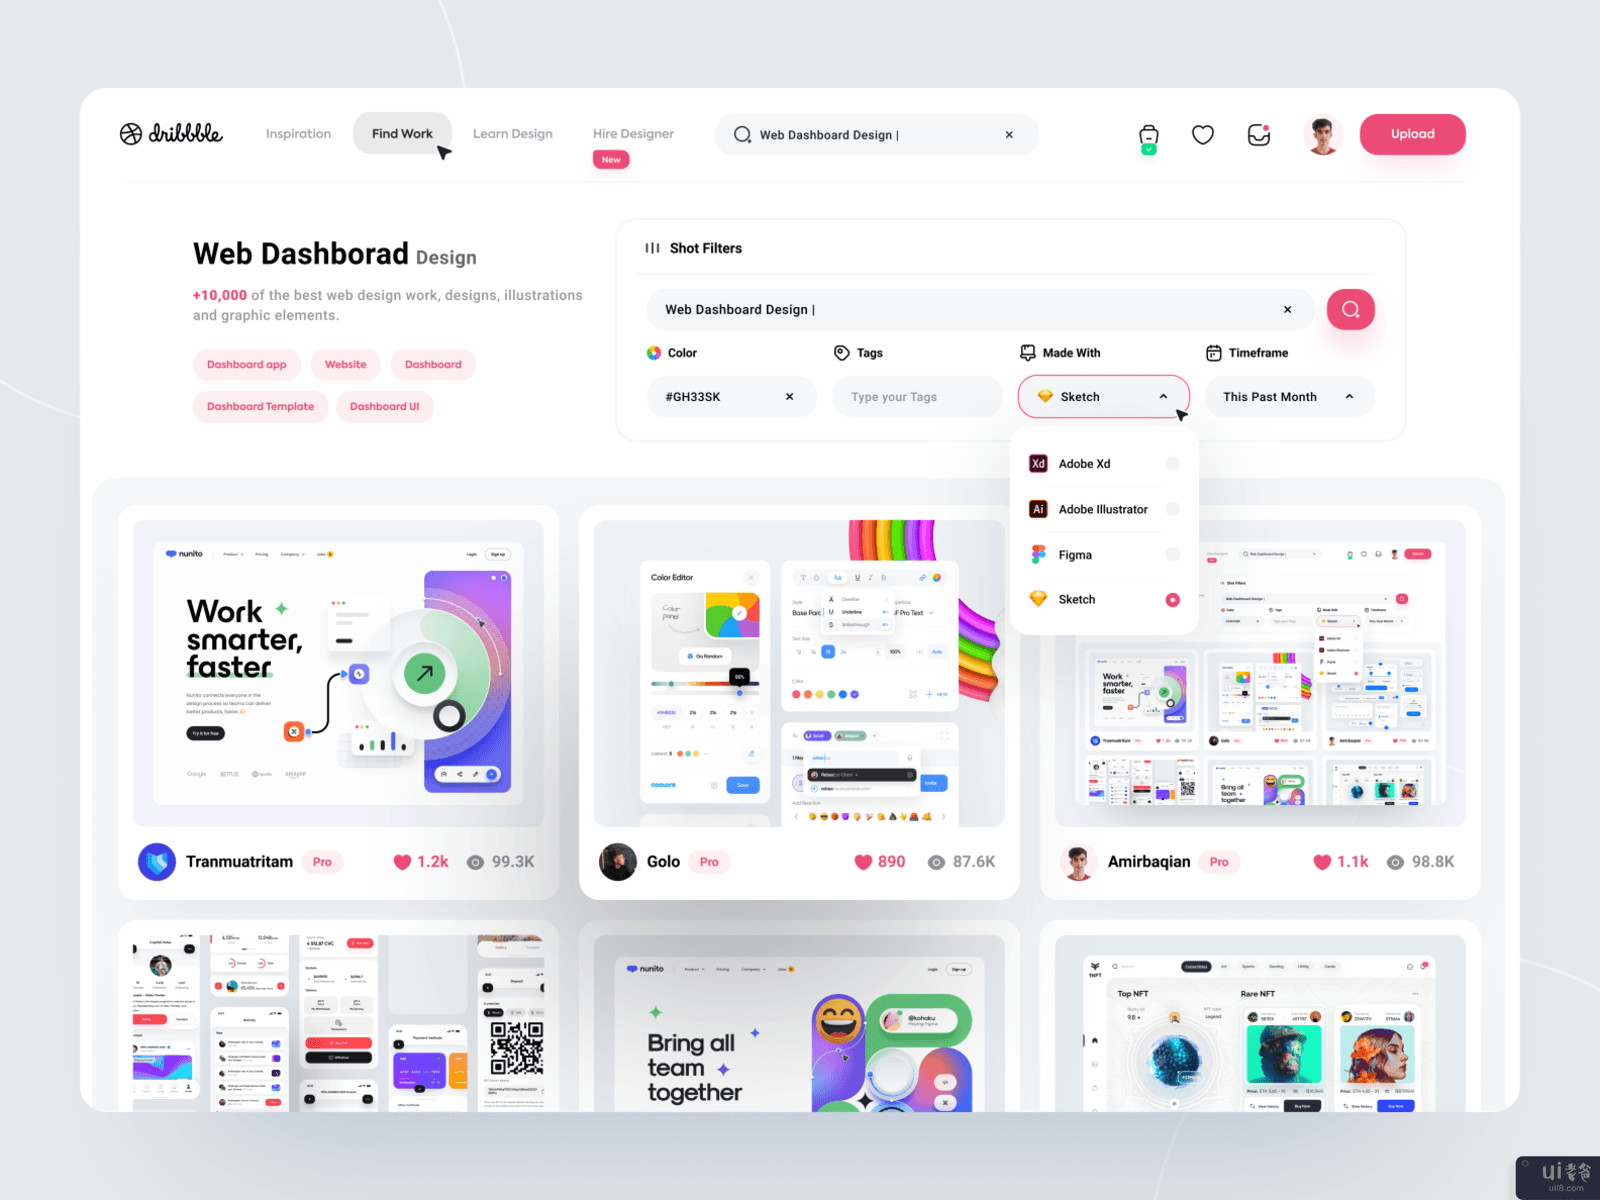 Dribbble重新设计 - 搜索页面(Dribbble Redesign - Search Page)插图